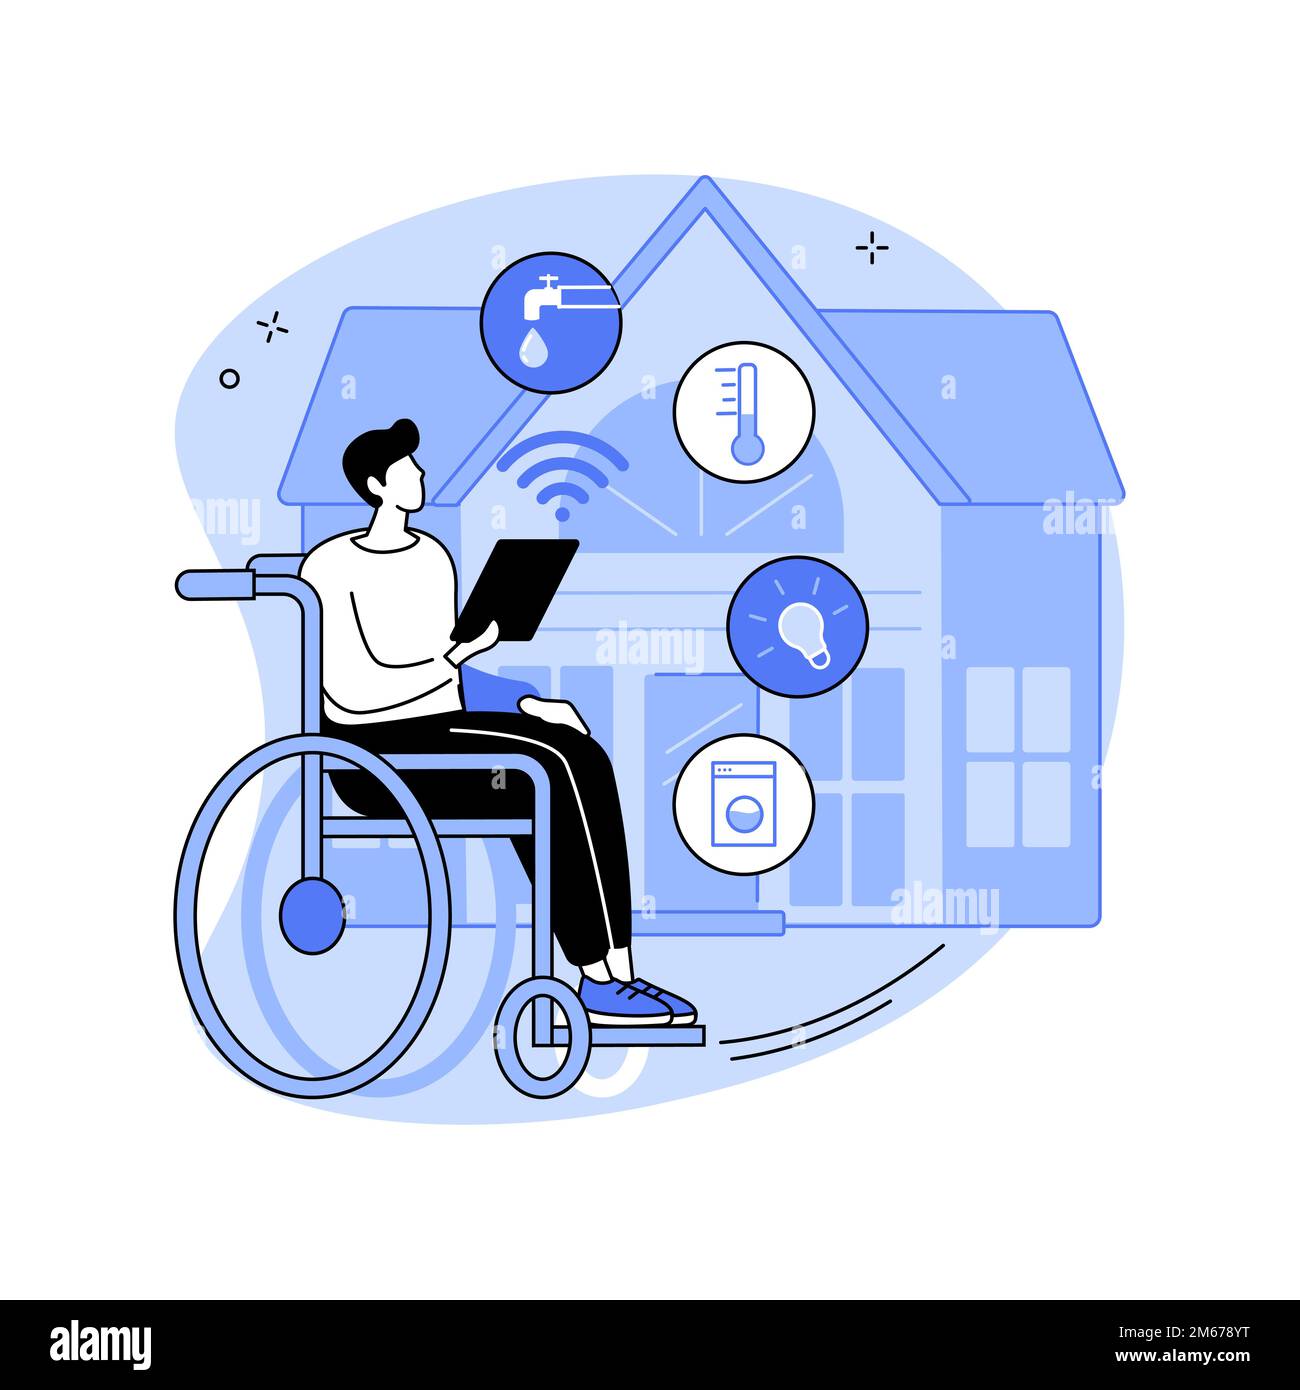 Smart technology for persons with disabilities abstract concept vector illustration. Home automation, door and motion sensors, health monitoring syste Stock Vector